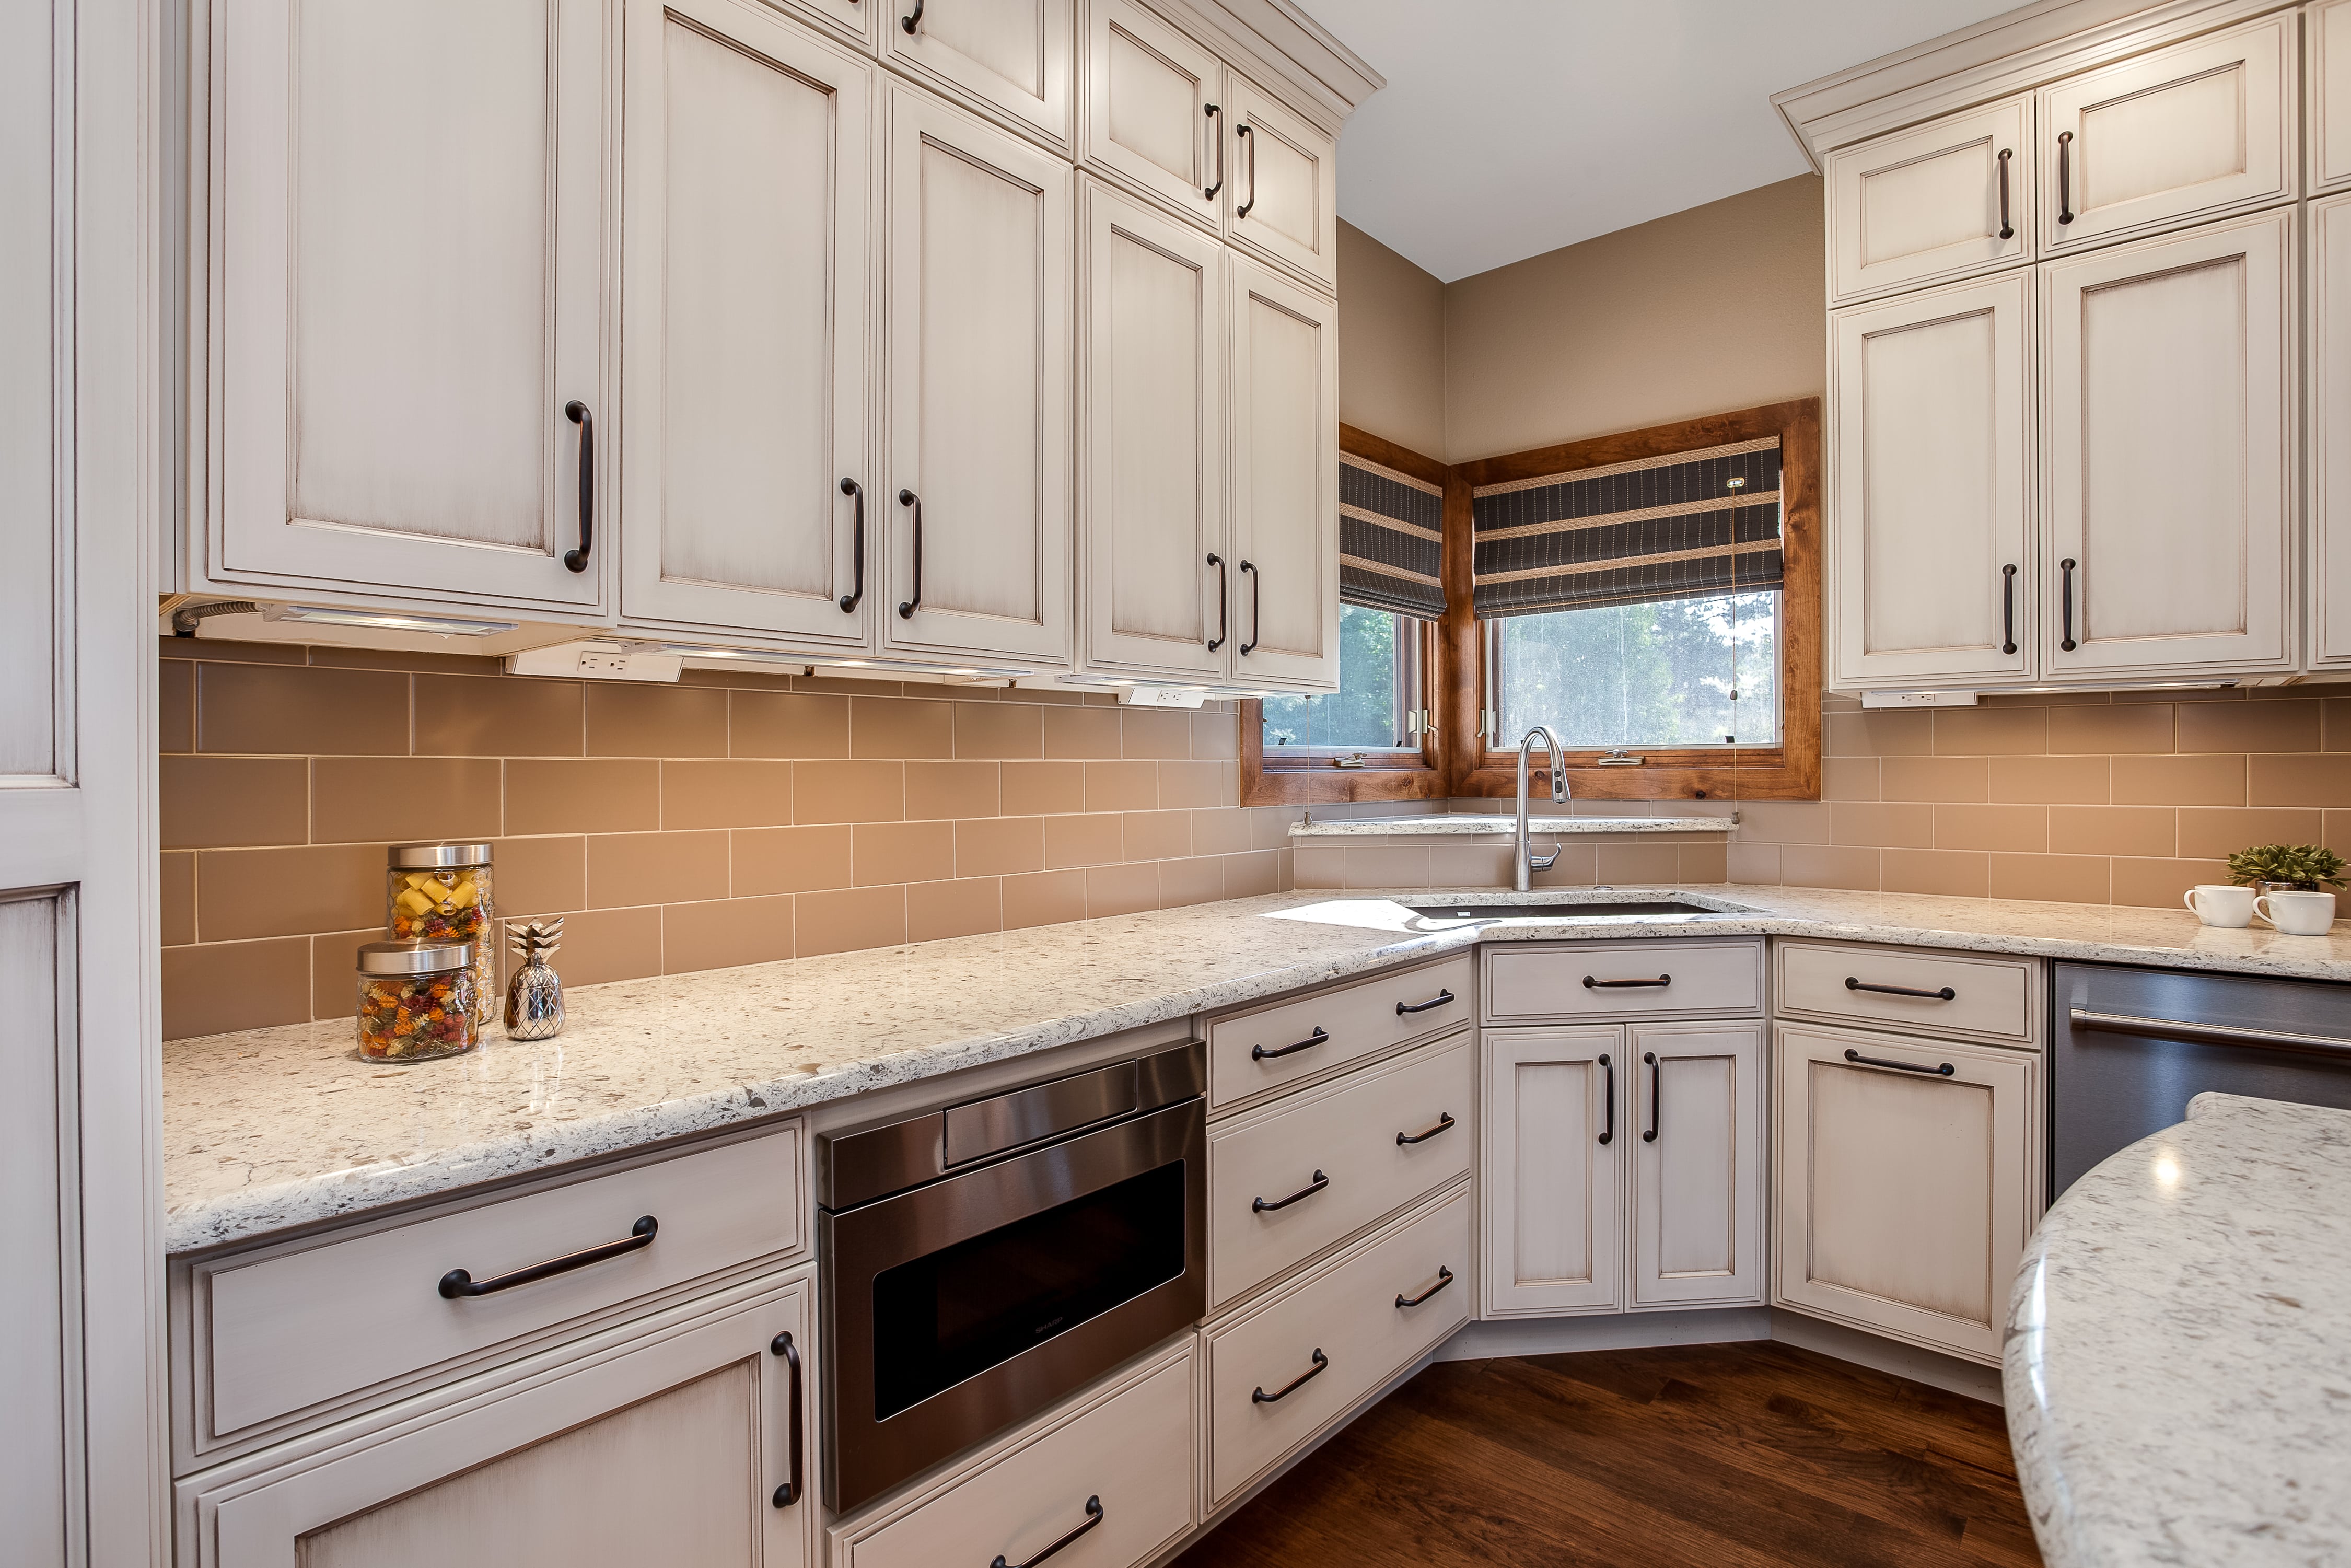 Cabinet Maintenance How To Clean And, How To Remove Scuff Marks From White Kitchen Cabinets